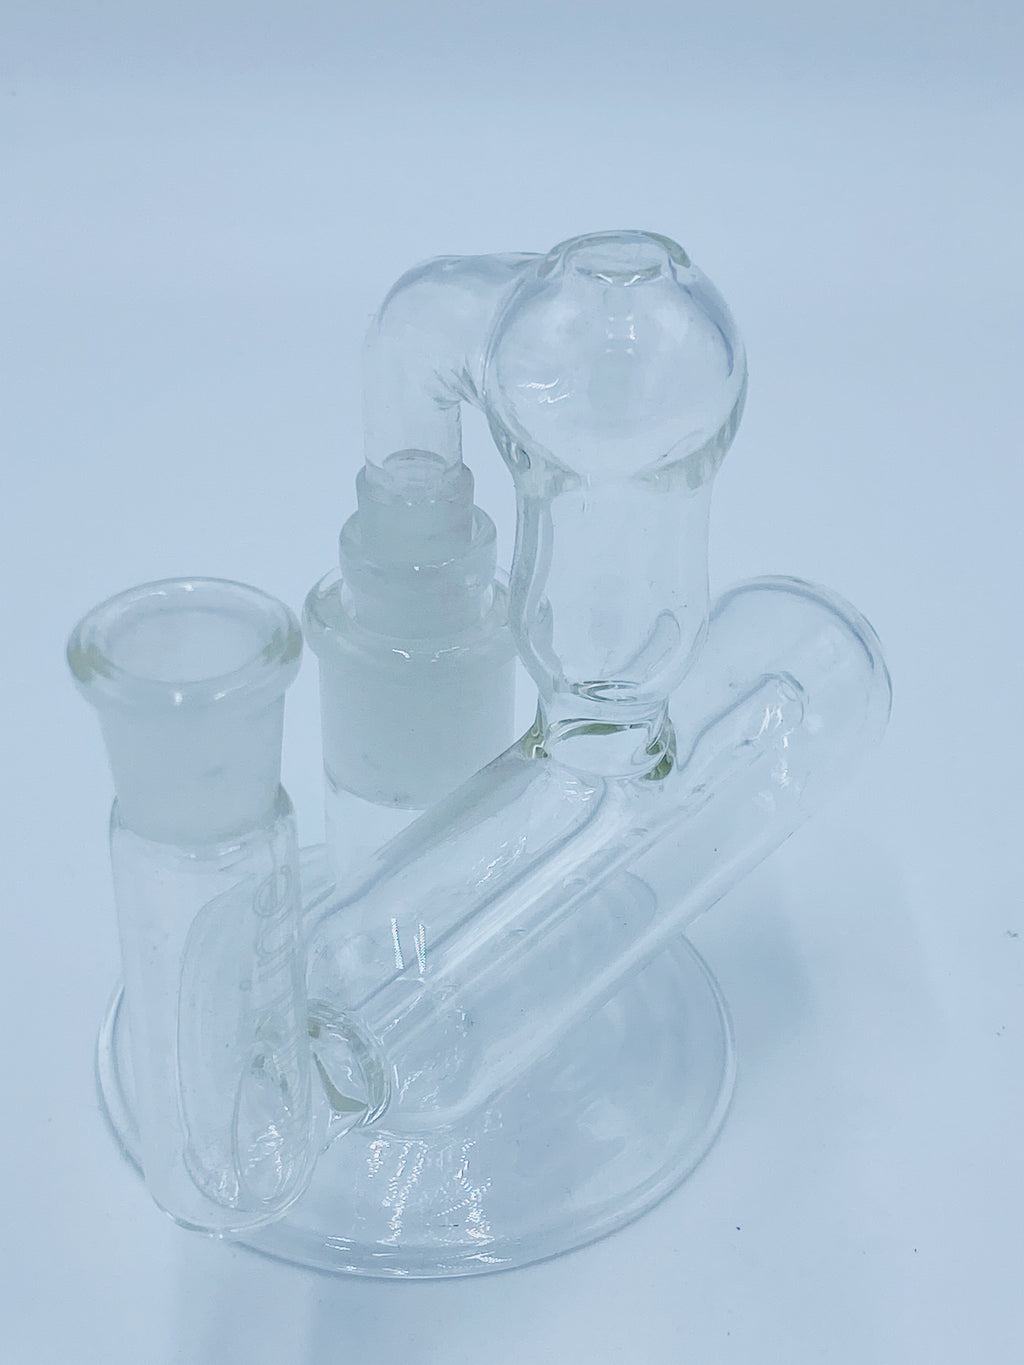 Mainline 14mm 90 Degree inline Ashcatcher accessories mainline- Smoke Country - Land of the artistic glass blown bongs